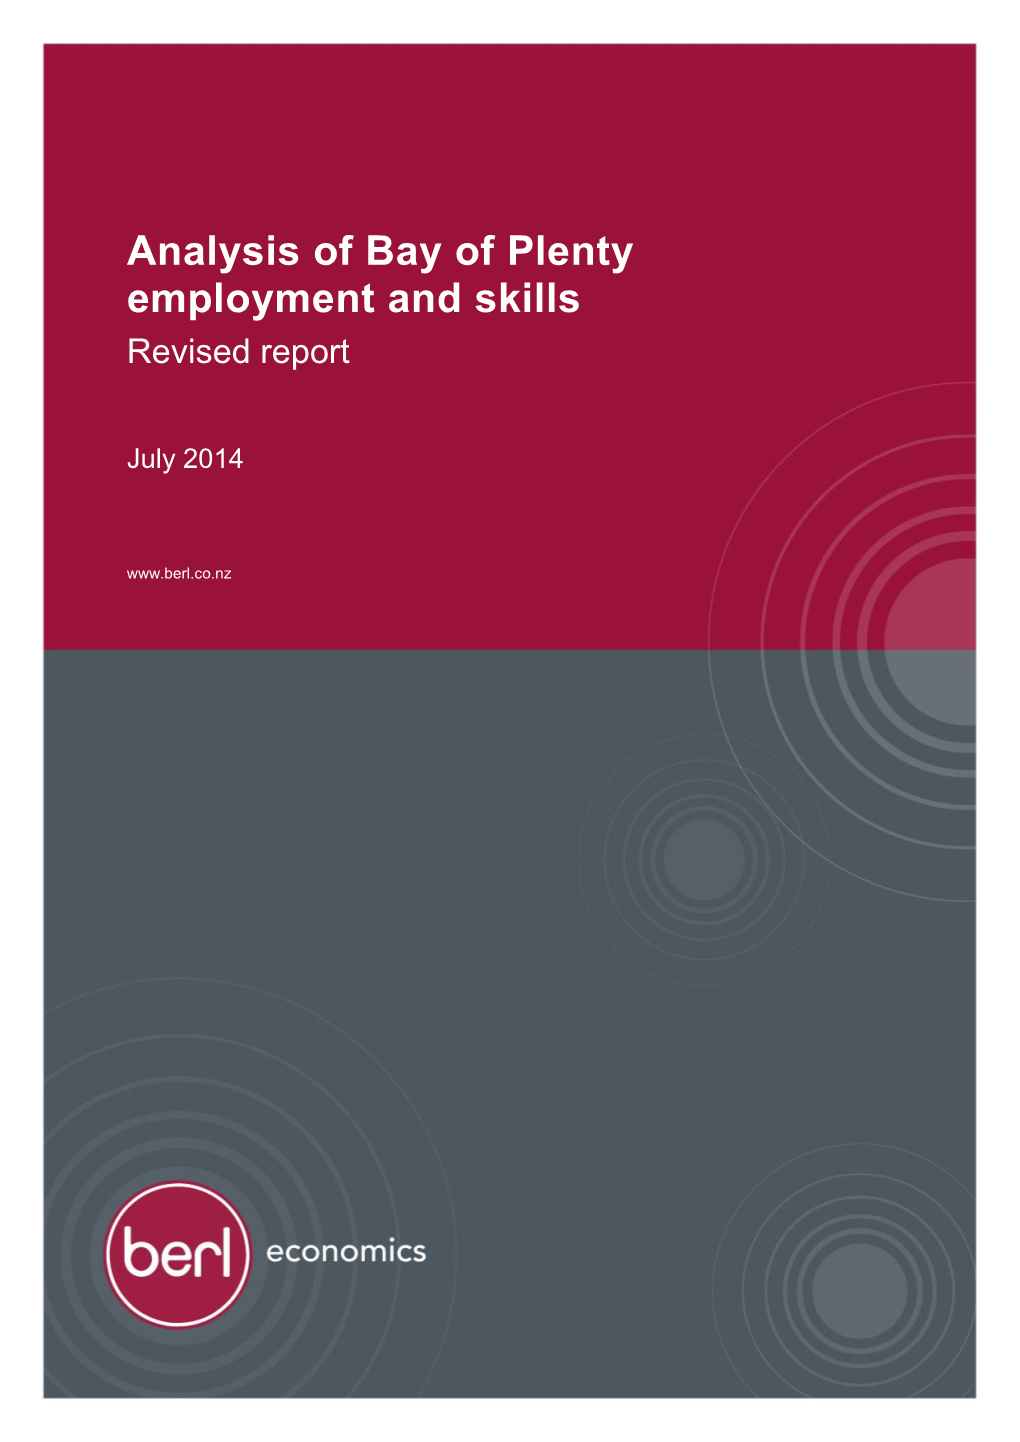 Analysis of Bay of Plenty Employment and Skills Revised Report